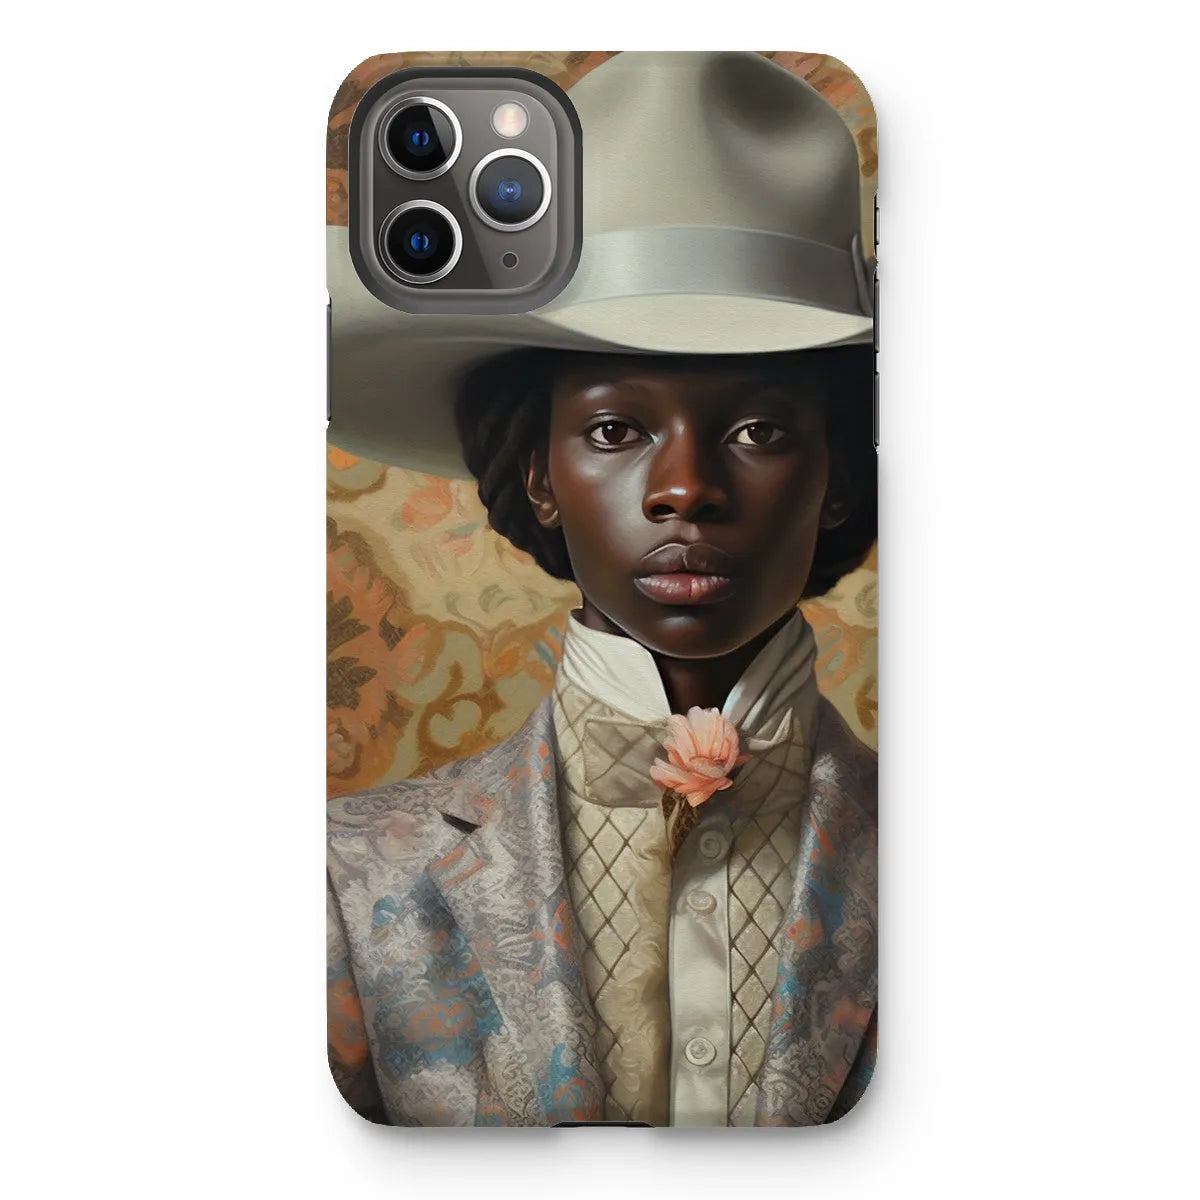 Caesar The Gay Cowboy - Gay Aesthetic Art Phone Case - Iphone 11 Pro Max / Matte - Mobile Phone Cases - Aesthetic Art